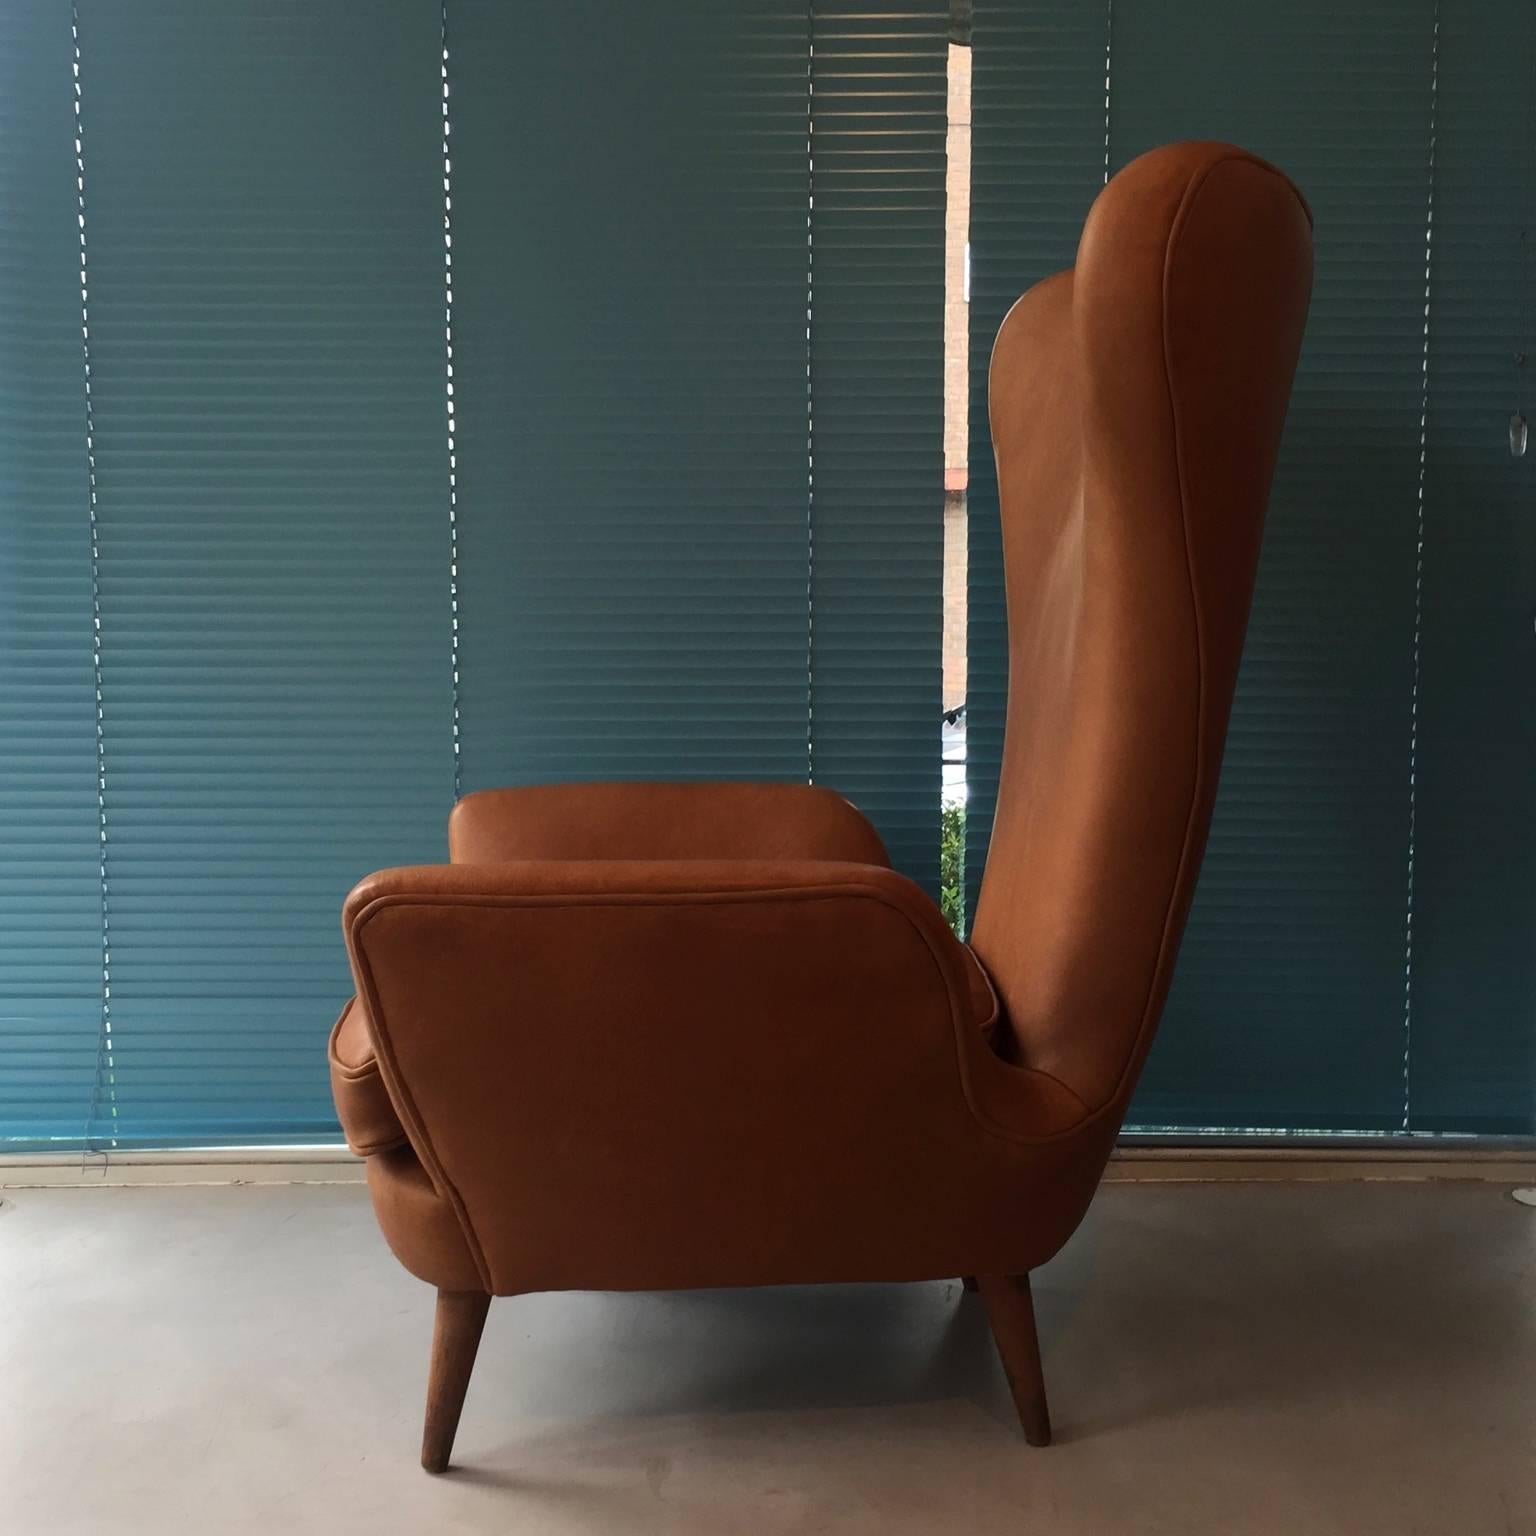 Two 1950's sculptural leather armchairs, reupholstered in an untreated tan leather.